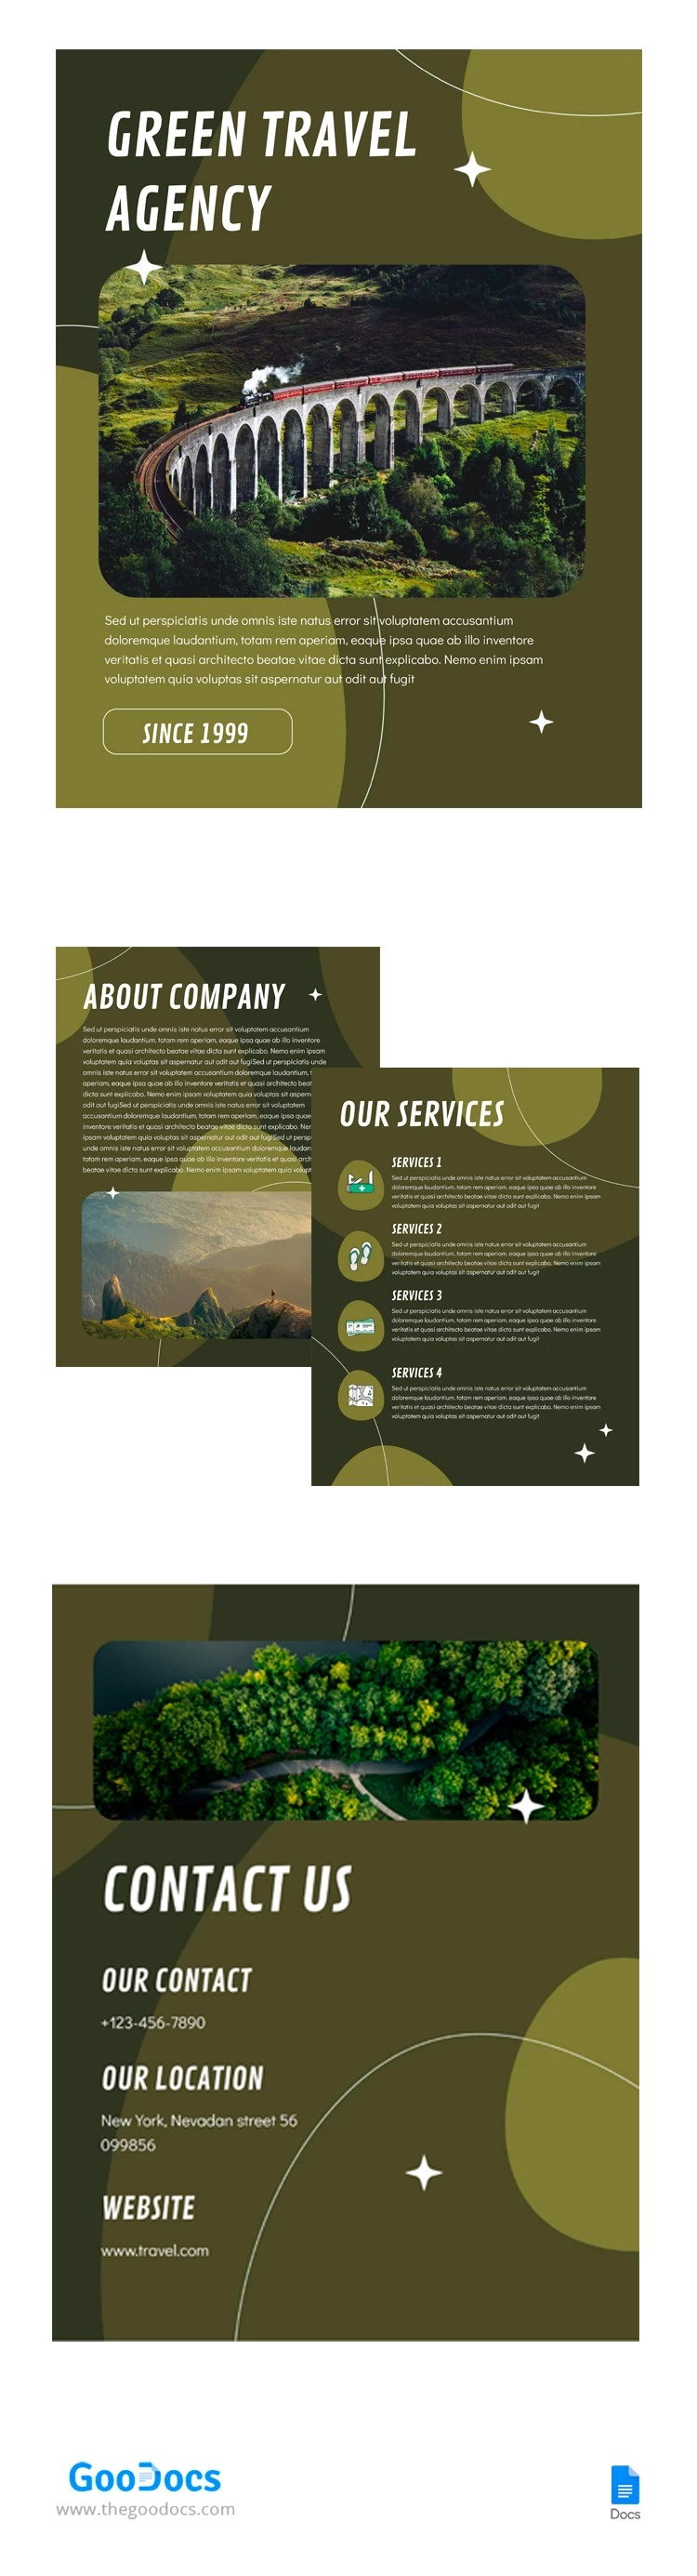 Abstract Green Travel Brochure - free Google Docs Template - 10066013